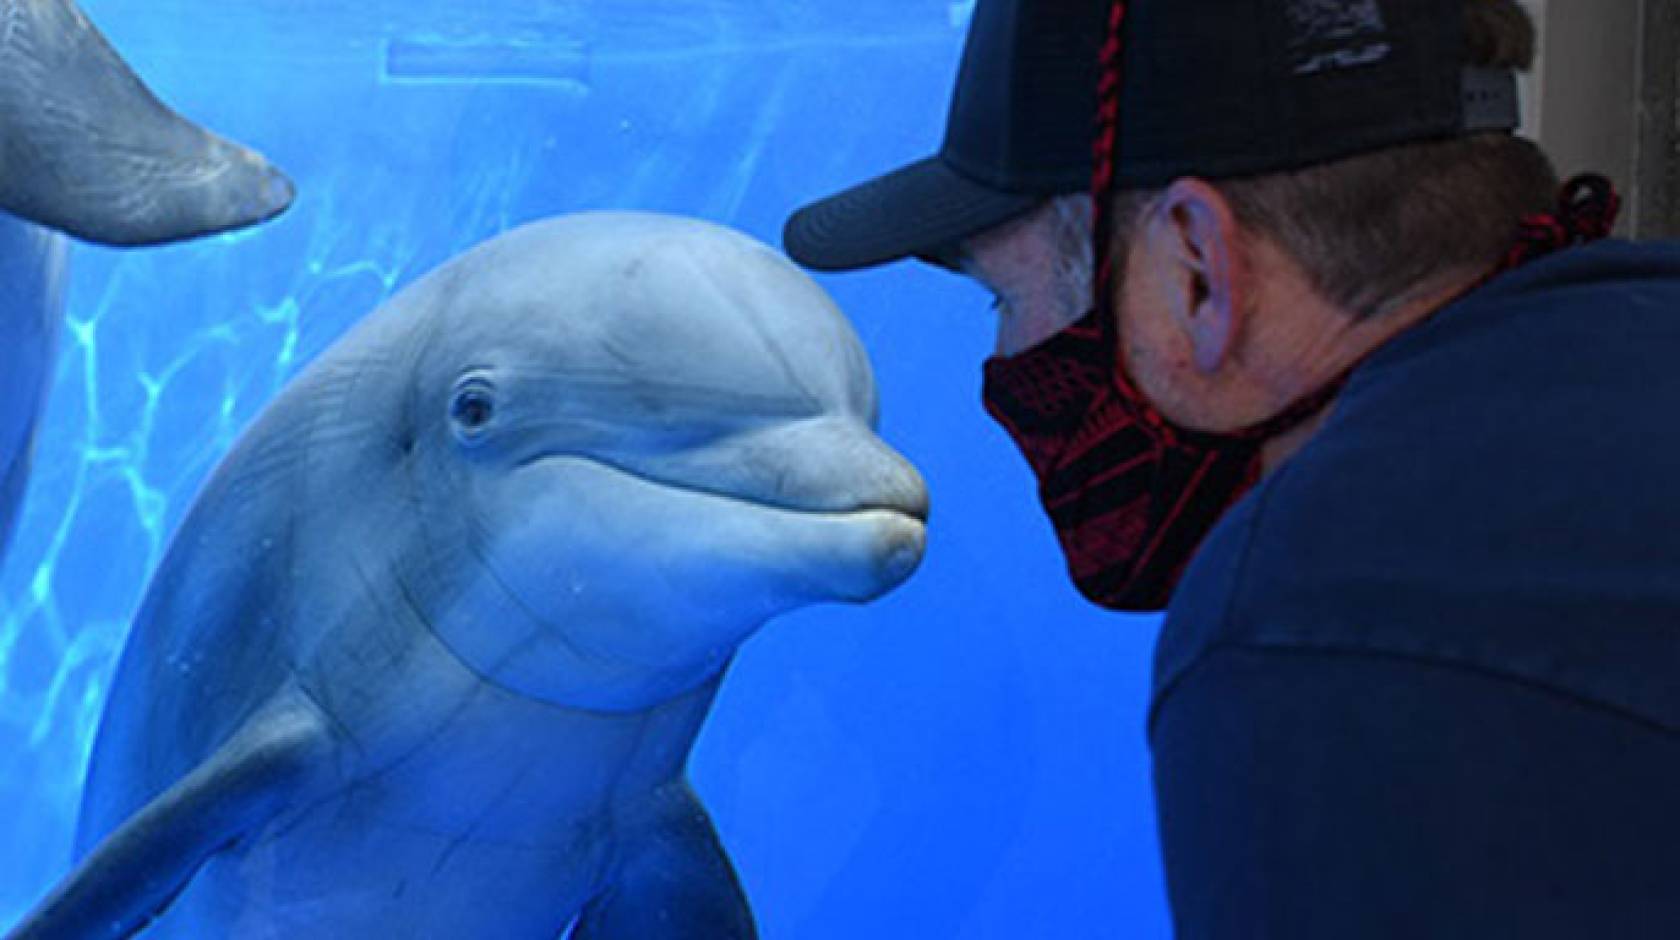 Dolphin encountering a man with a mask